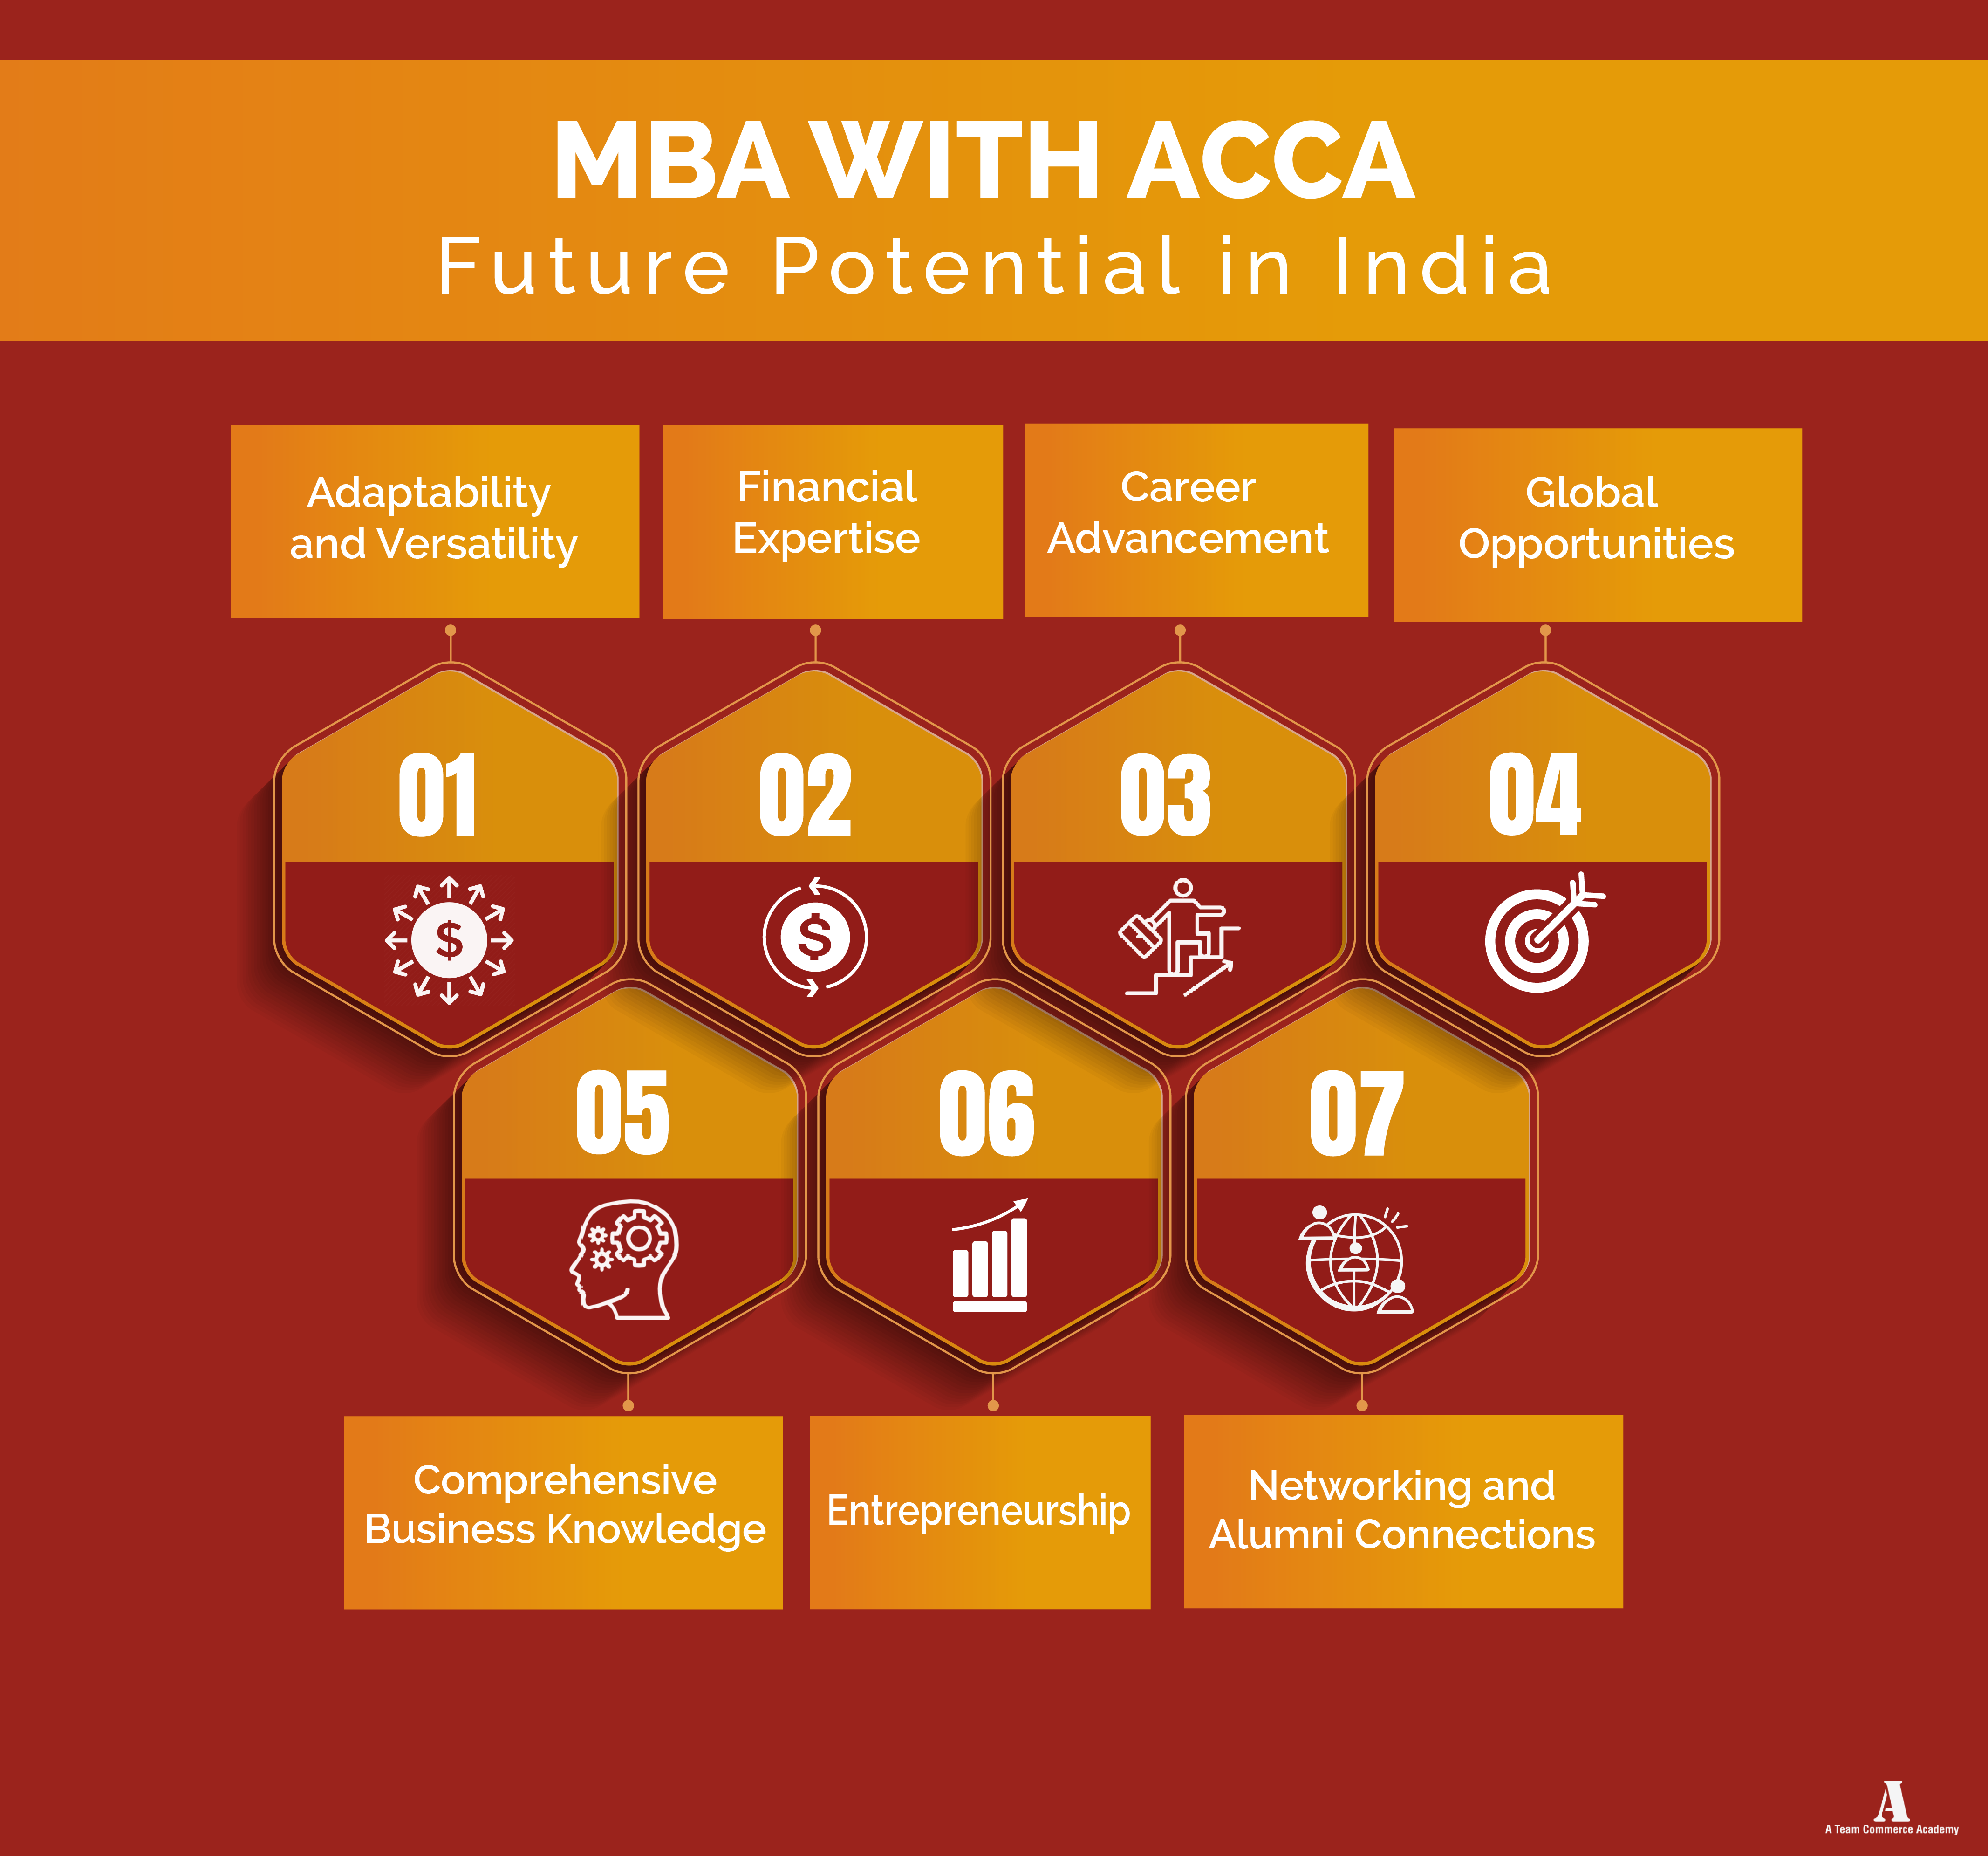 MBA with ACCA Future Potential in India